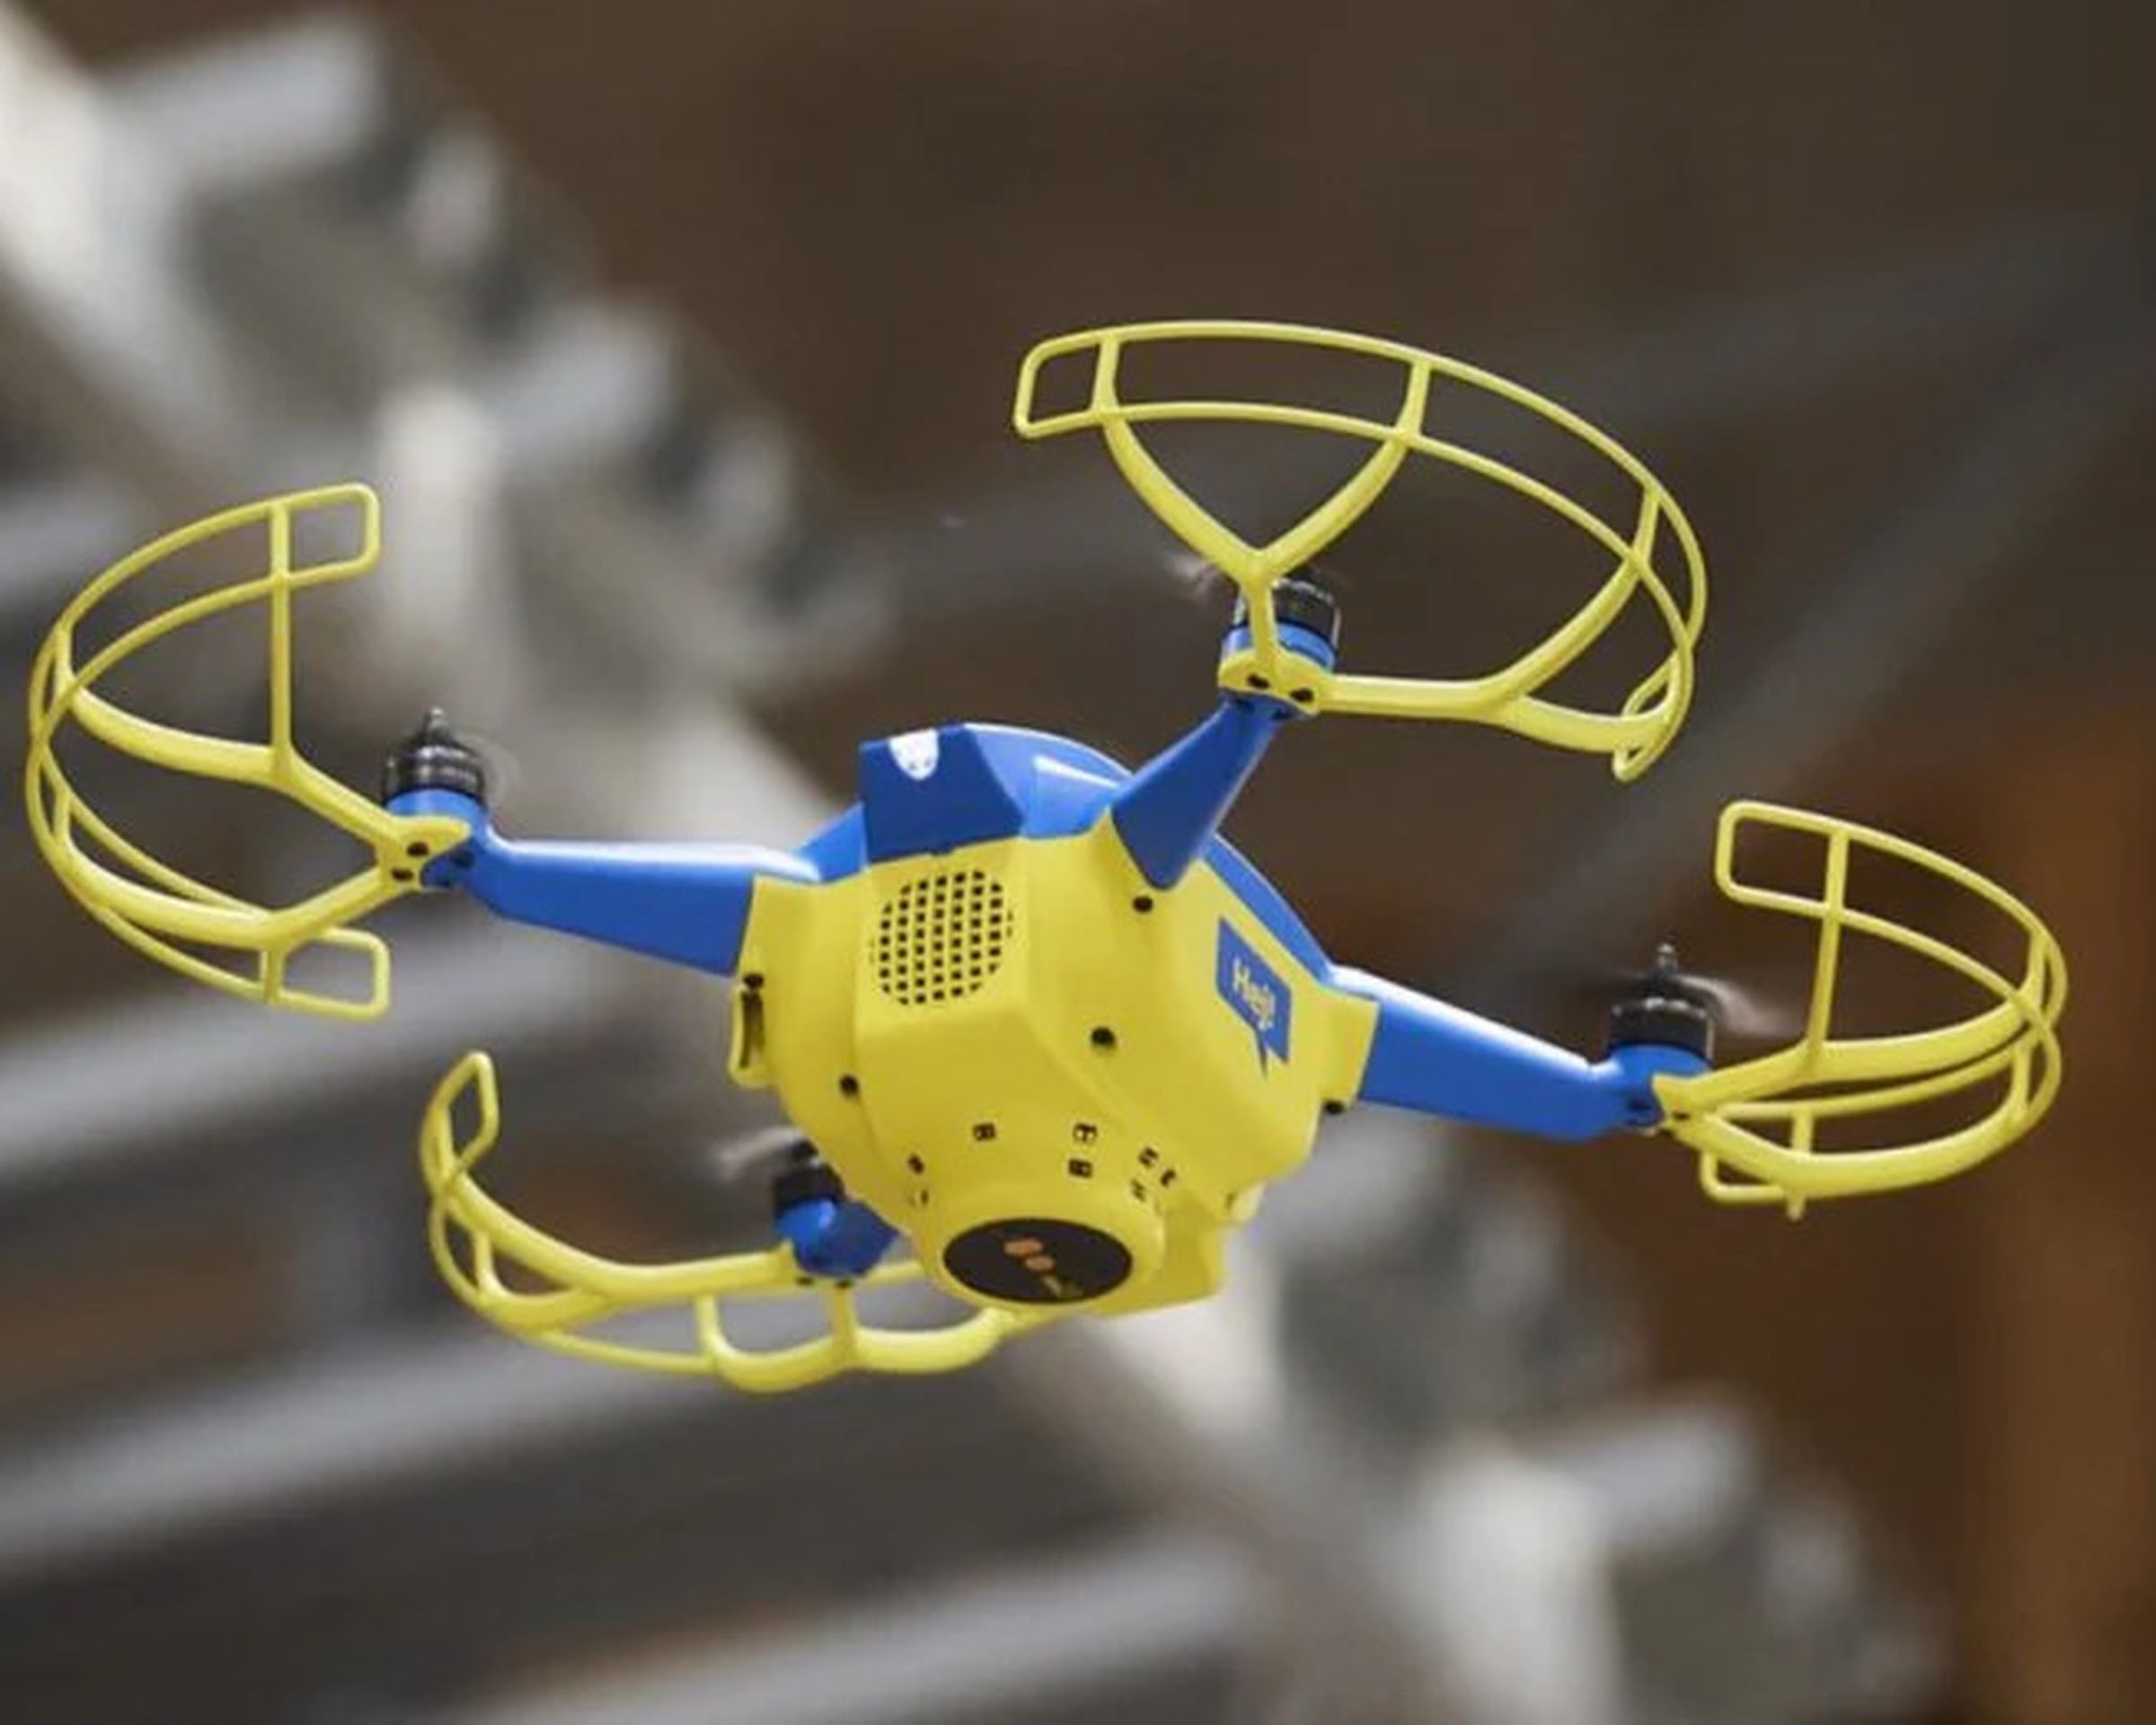 An image showing a blue and yellow drone in mid-air